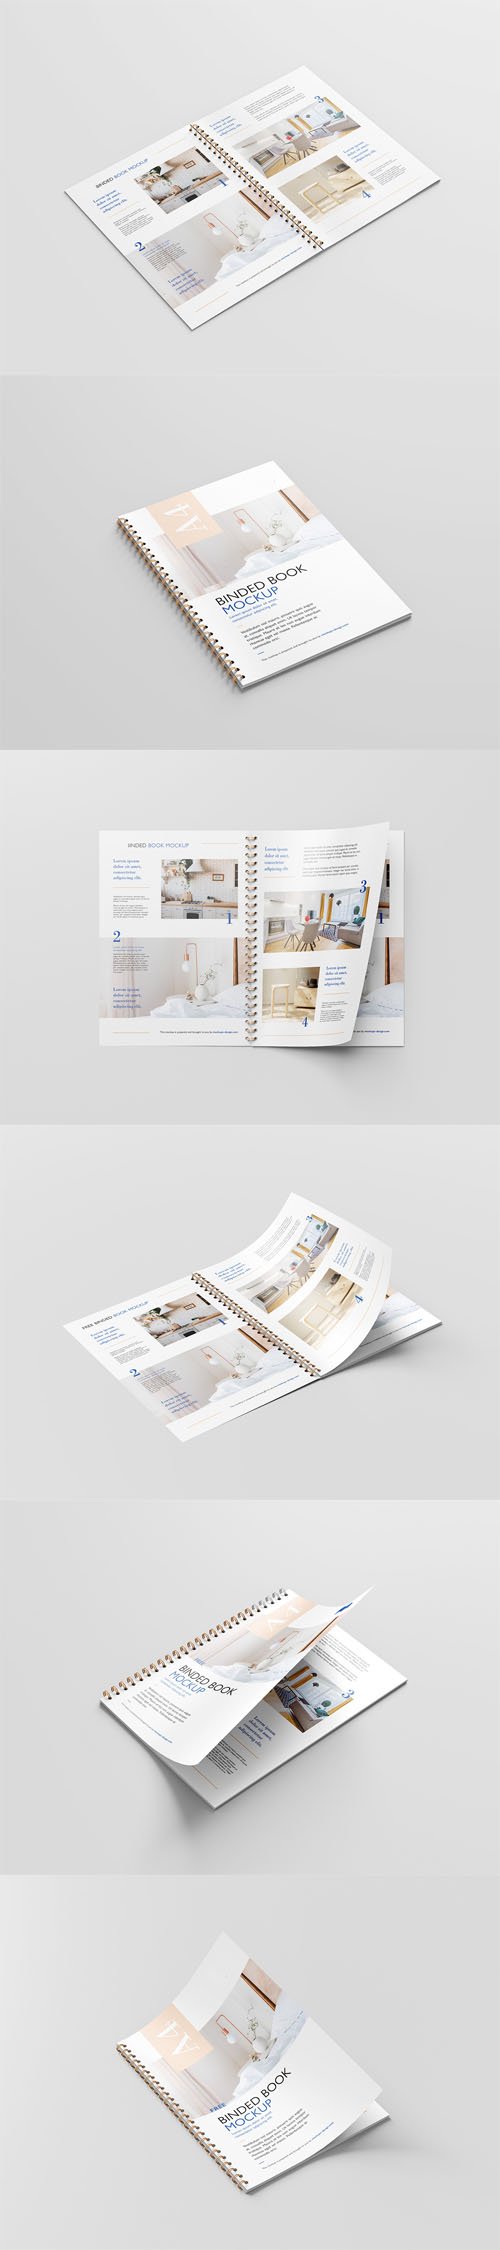 Binded Book PSD Mockup Template